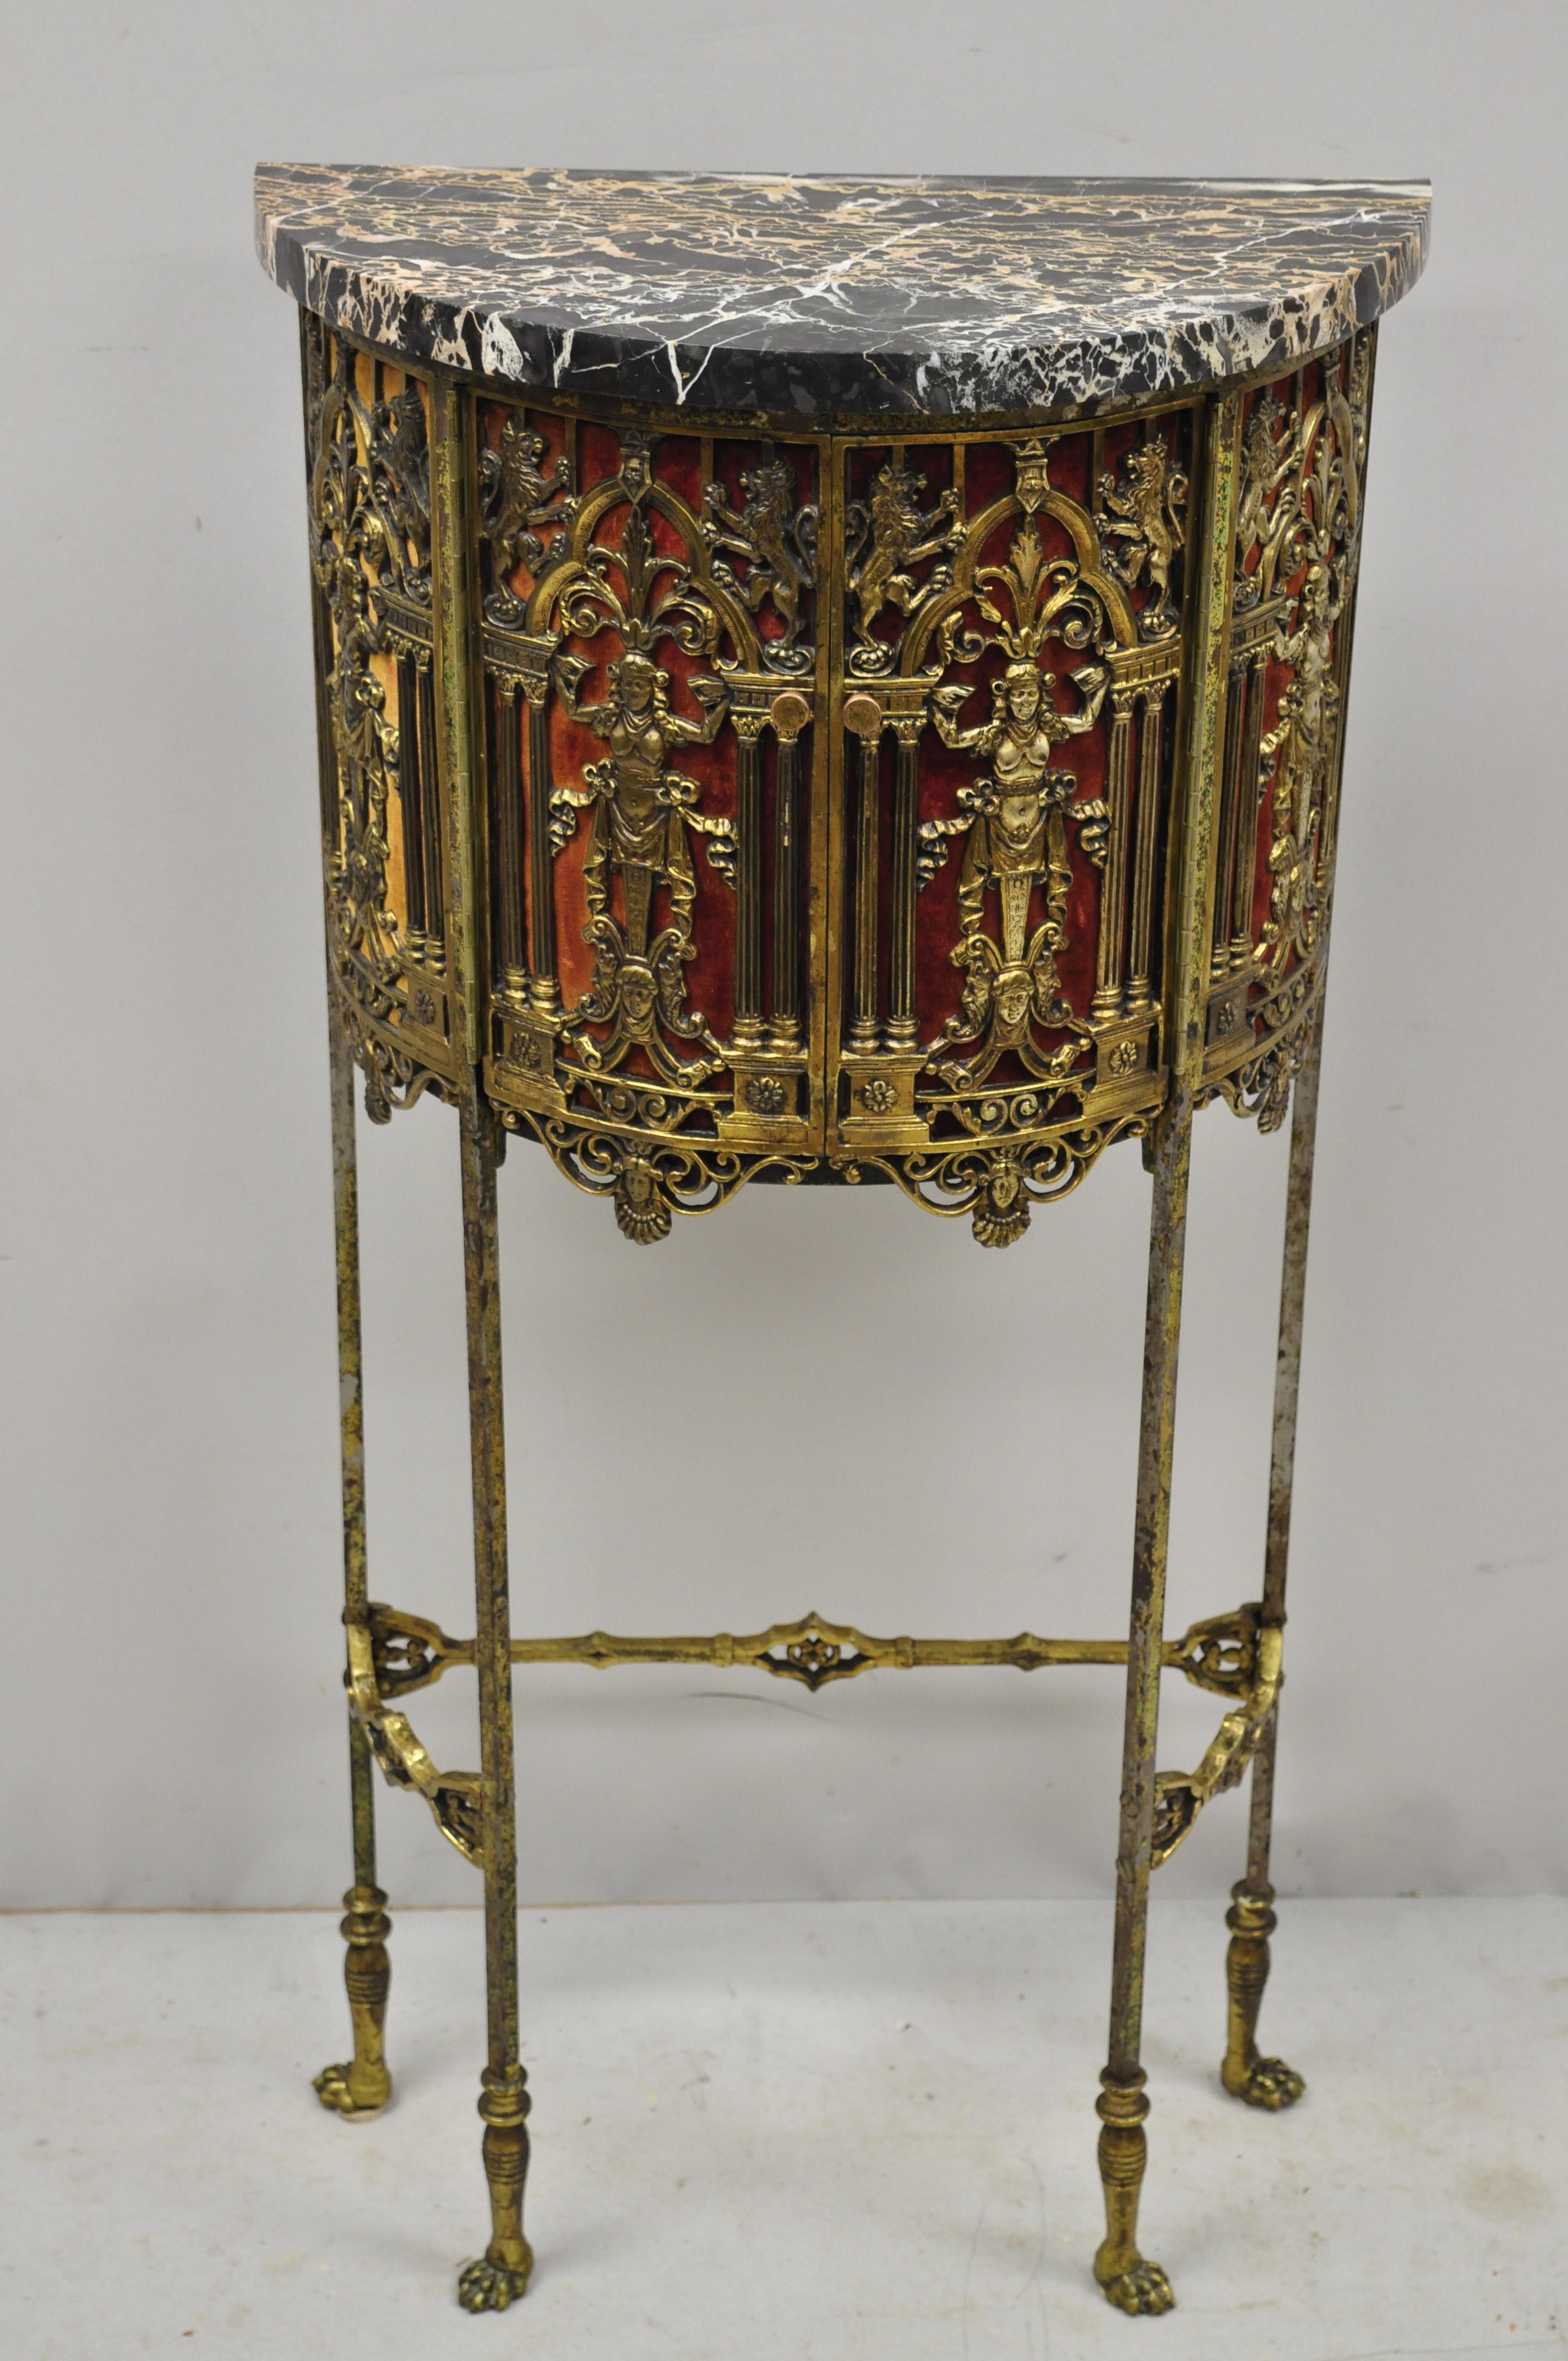 Oscar Bach attributed figural bronze marble-top telephone hall stand with chair. Item features an ornate figural bronze telephone cabinet stand, marble top, small chair with needlepoint seat, wonderful patina, paw feet, very nice antique item,